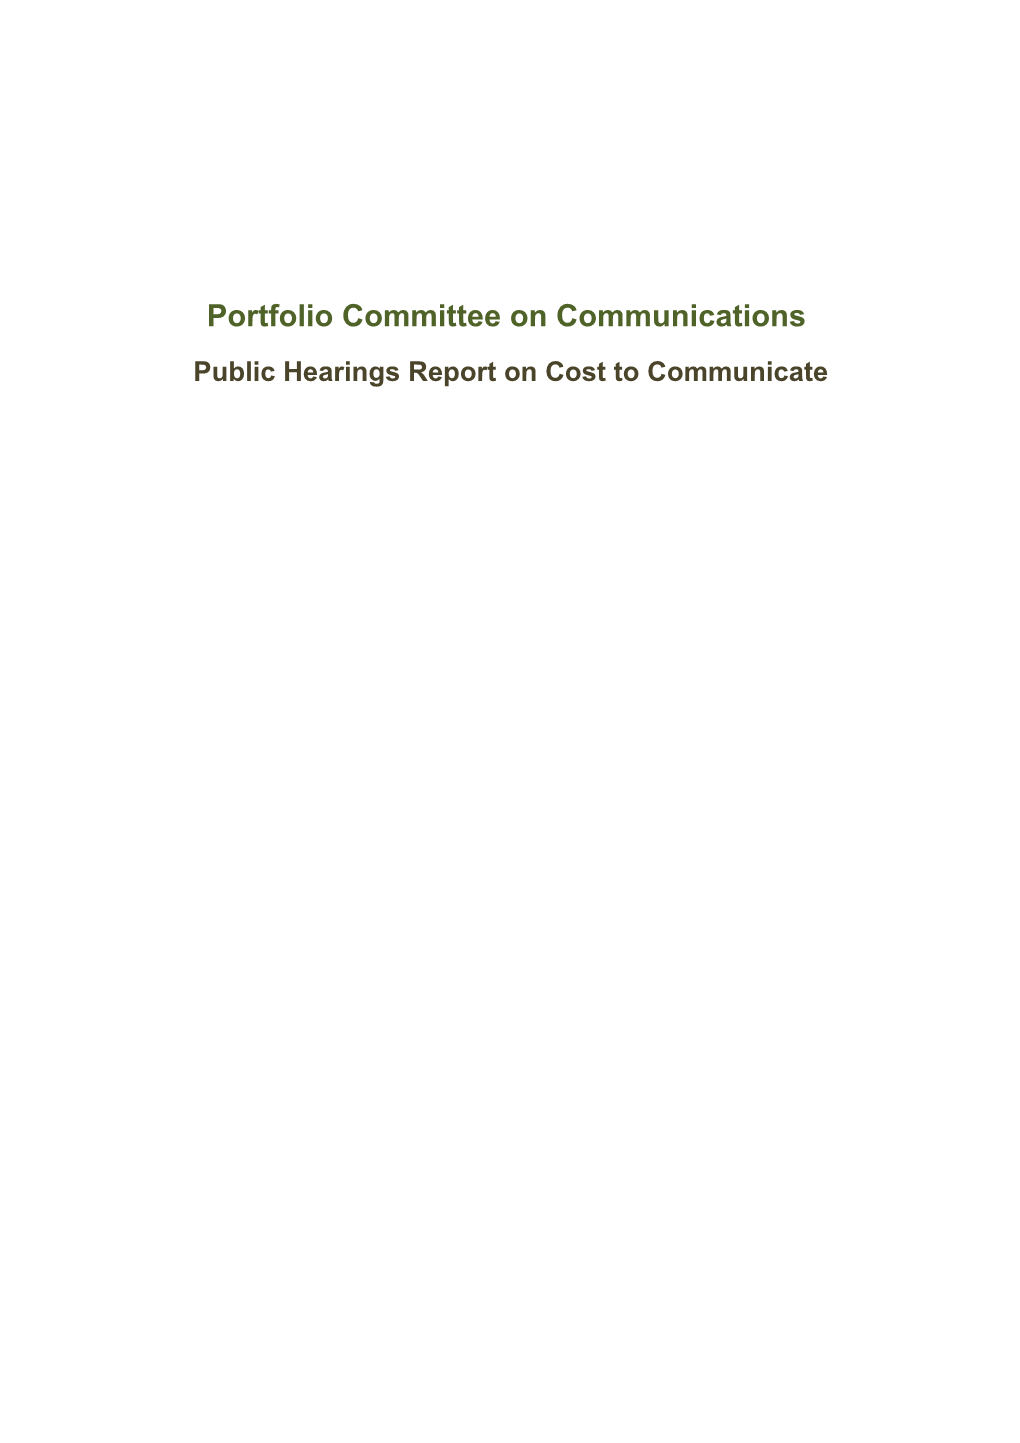 Public Hearings Report on Cost to Communicate